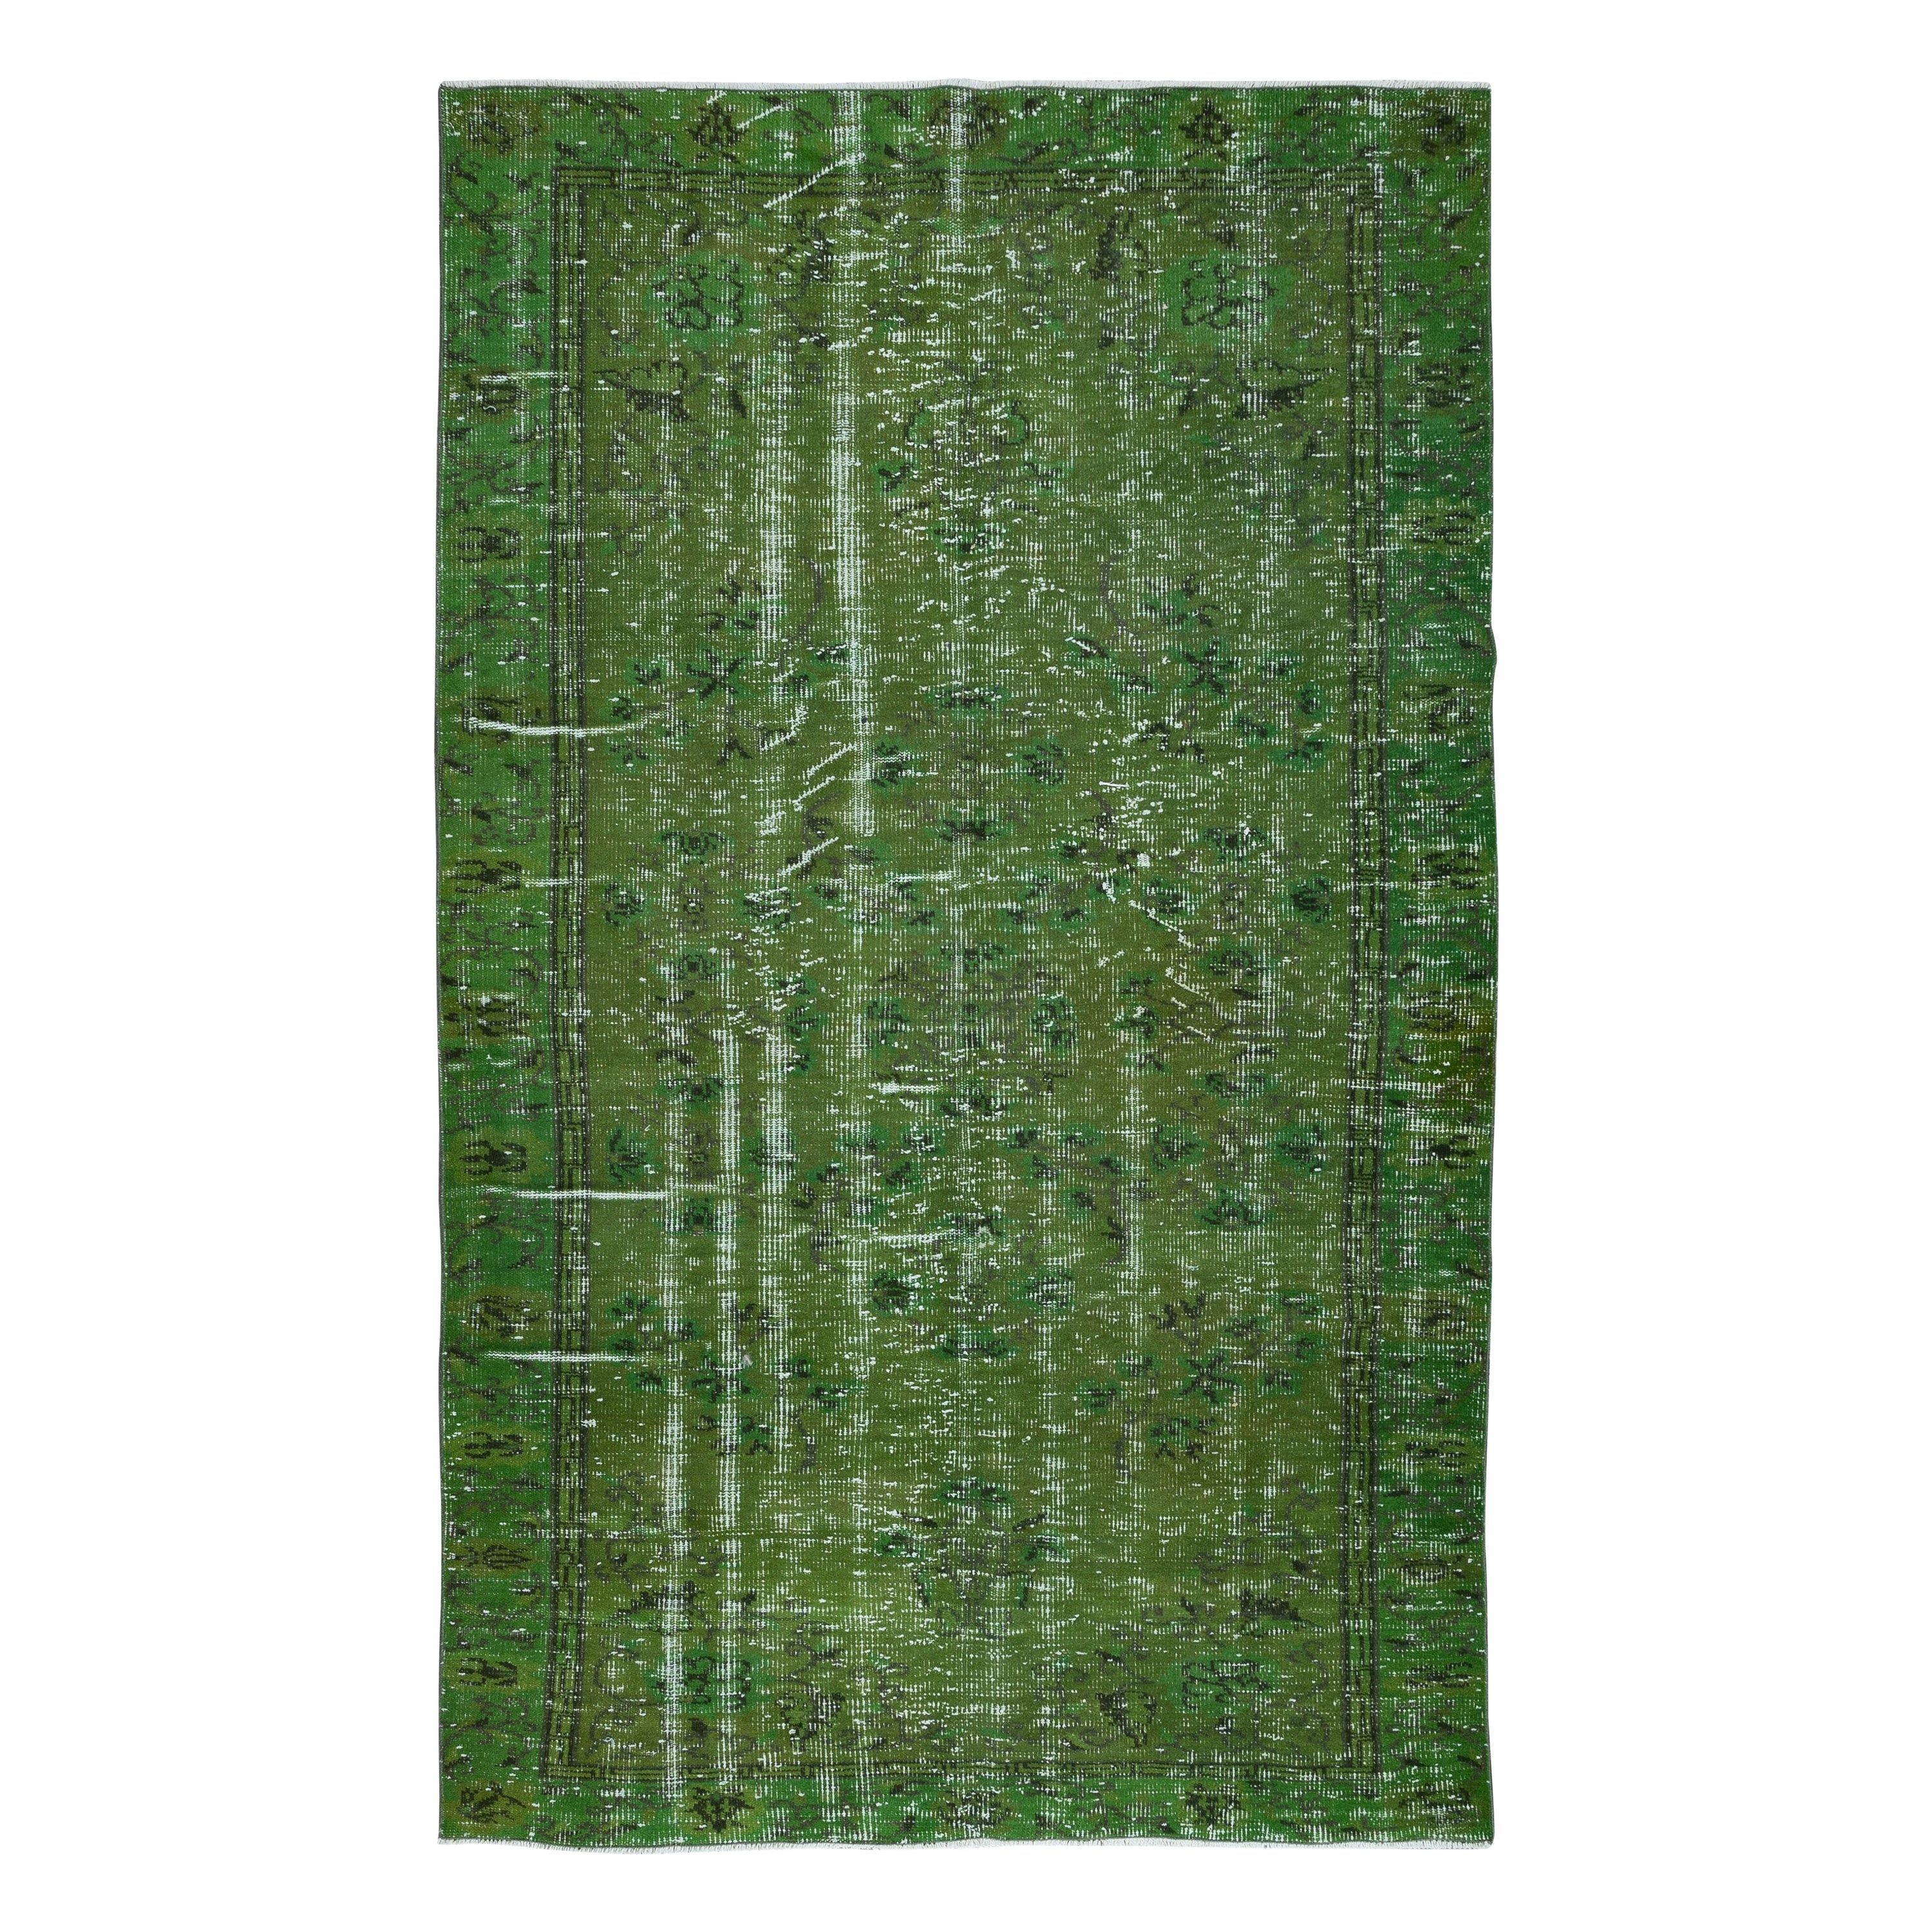 5.4x8.8 Ft Hand-Made Turkish Area Rug in Green, Modern Upcycled Wool Carpet (tapis de laine moderne recyclé)